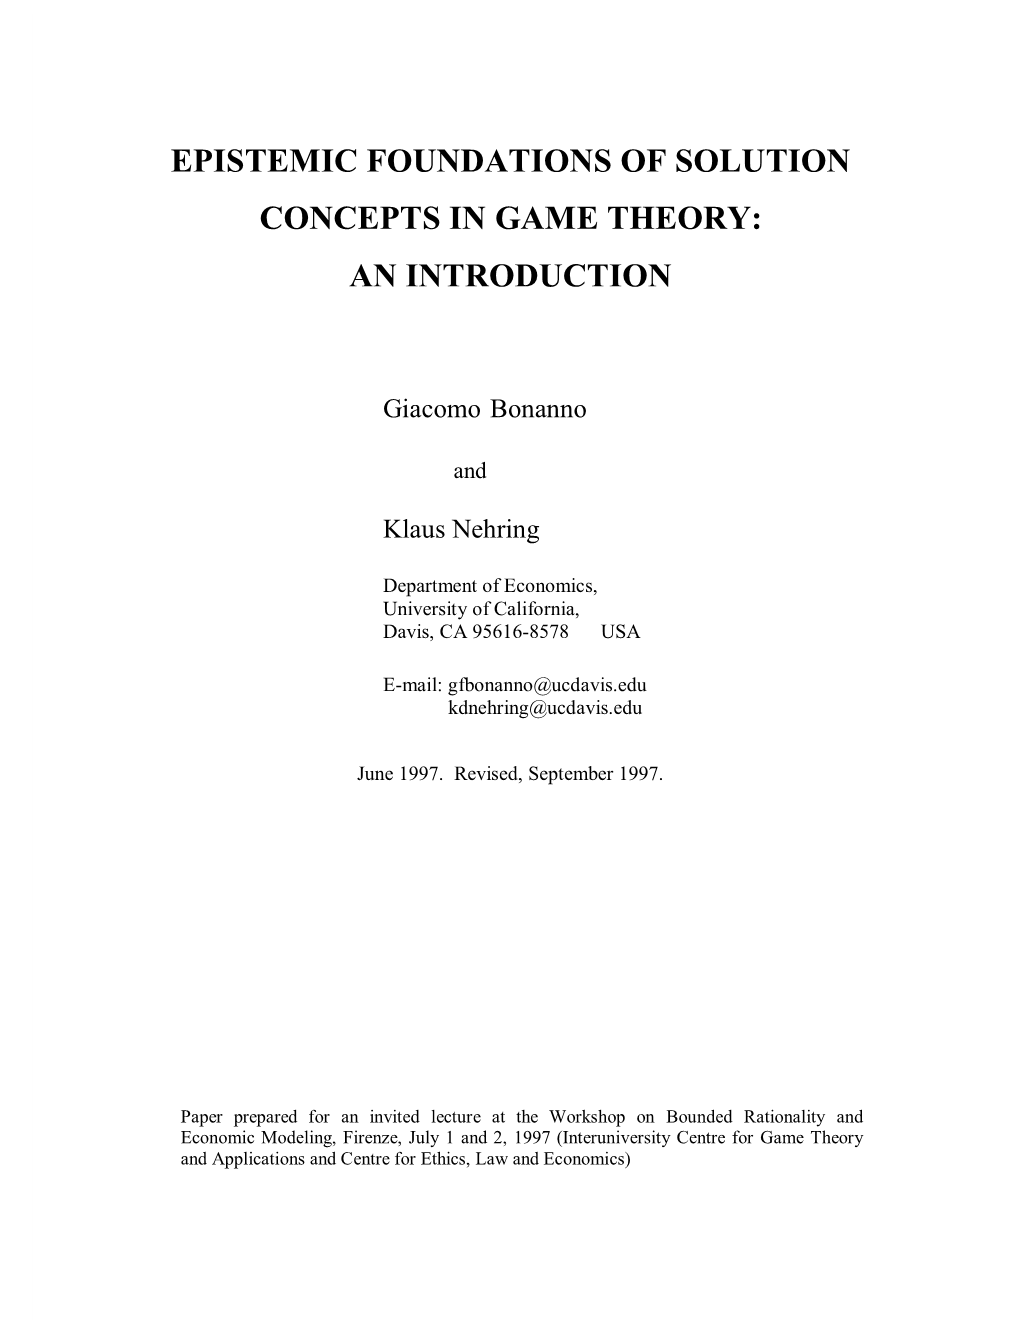 Epistemic Foundations of Solution Concepts in Game Theory: an Introduction